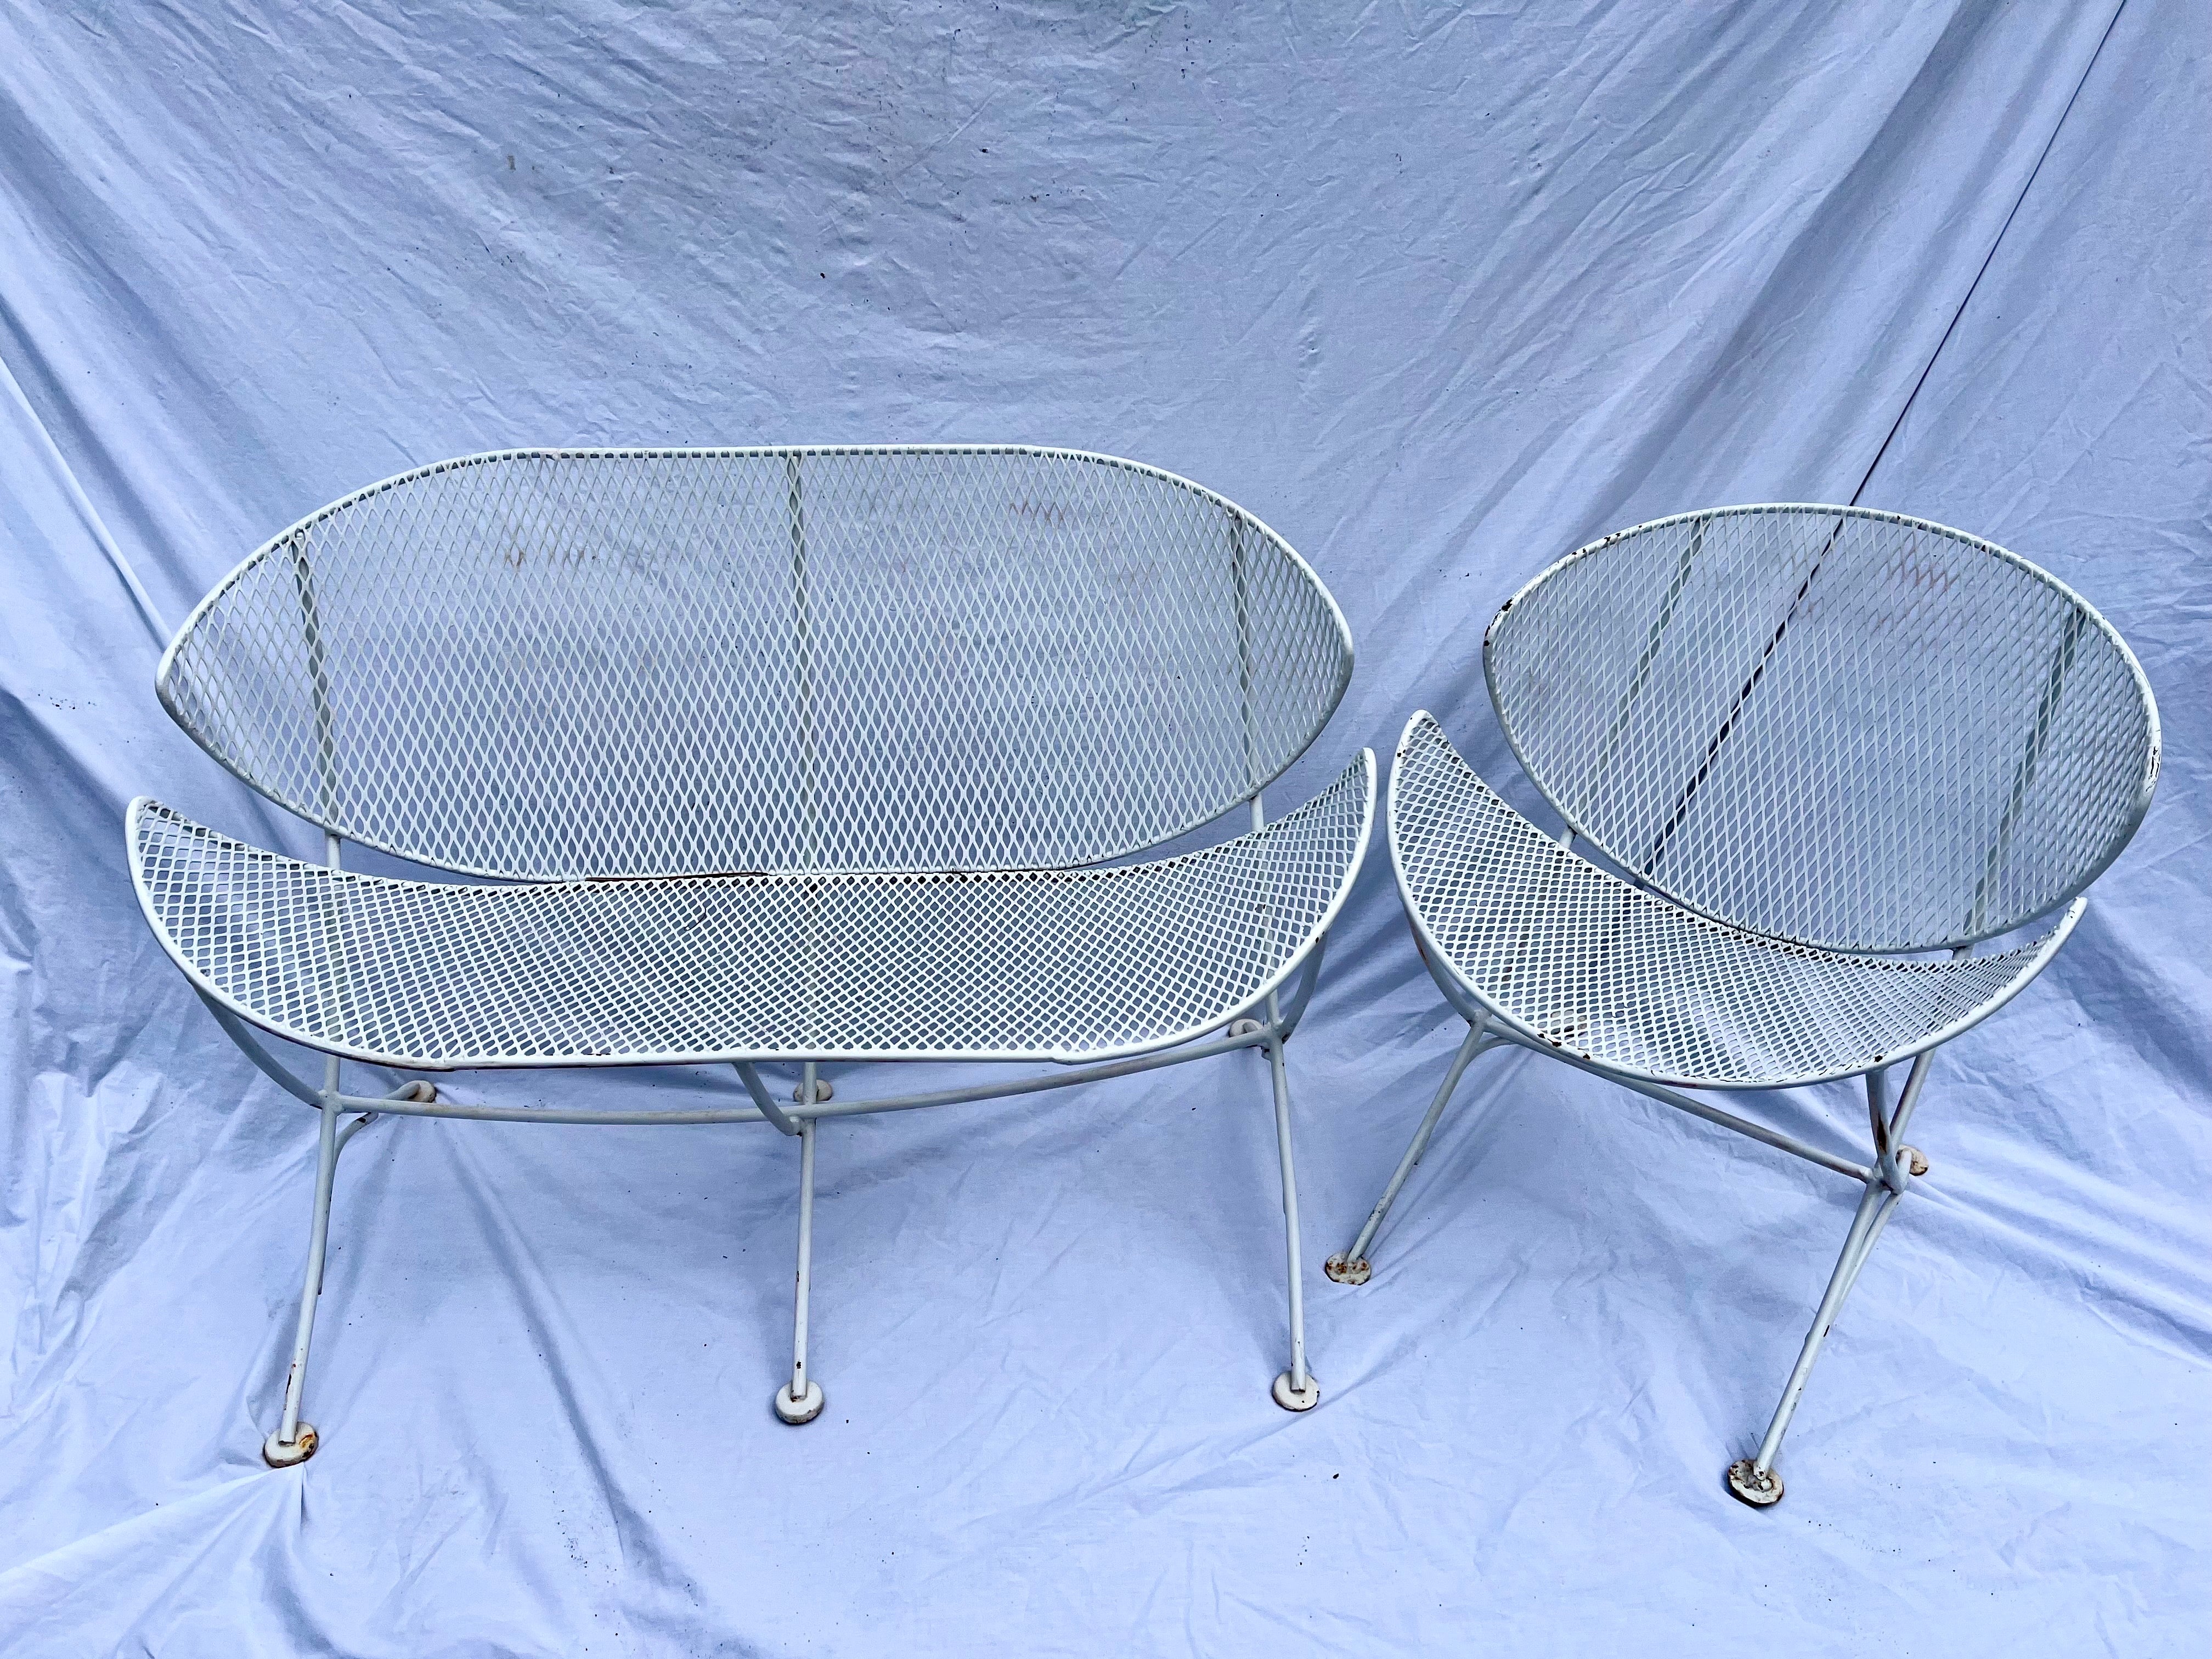 A beautiful sofa and chair (being sold as a set of two pieces) designed by Maurizio Tempestini for Salterini. This is his iconic clamshell design. Featuring a mesh seat and clamshell style hoop support for both the sofa and chair. The set of two